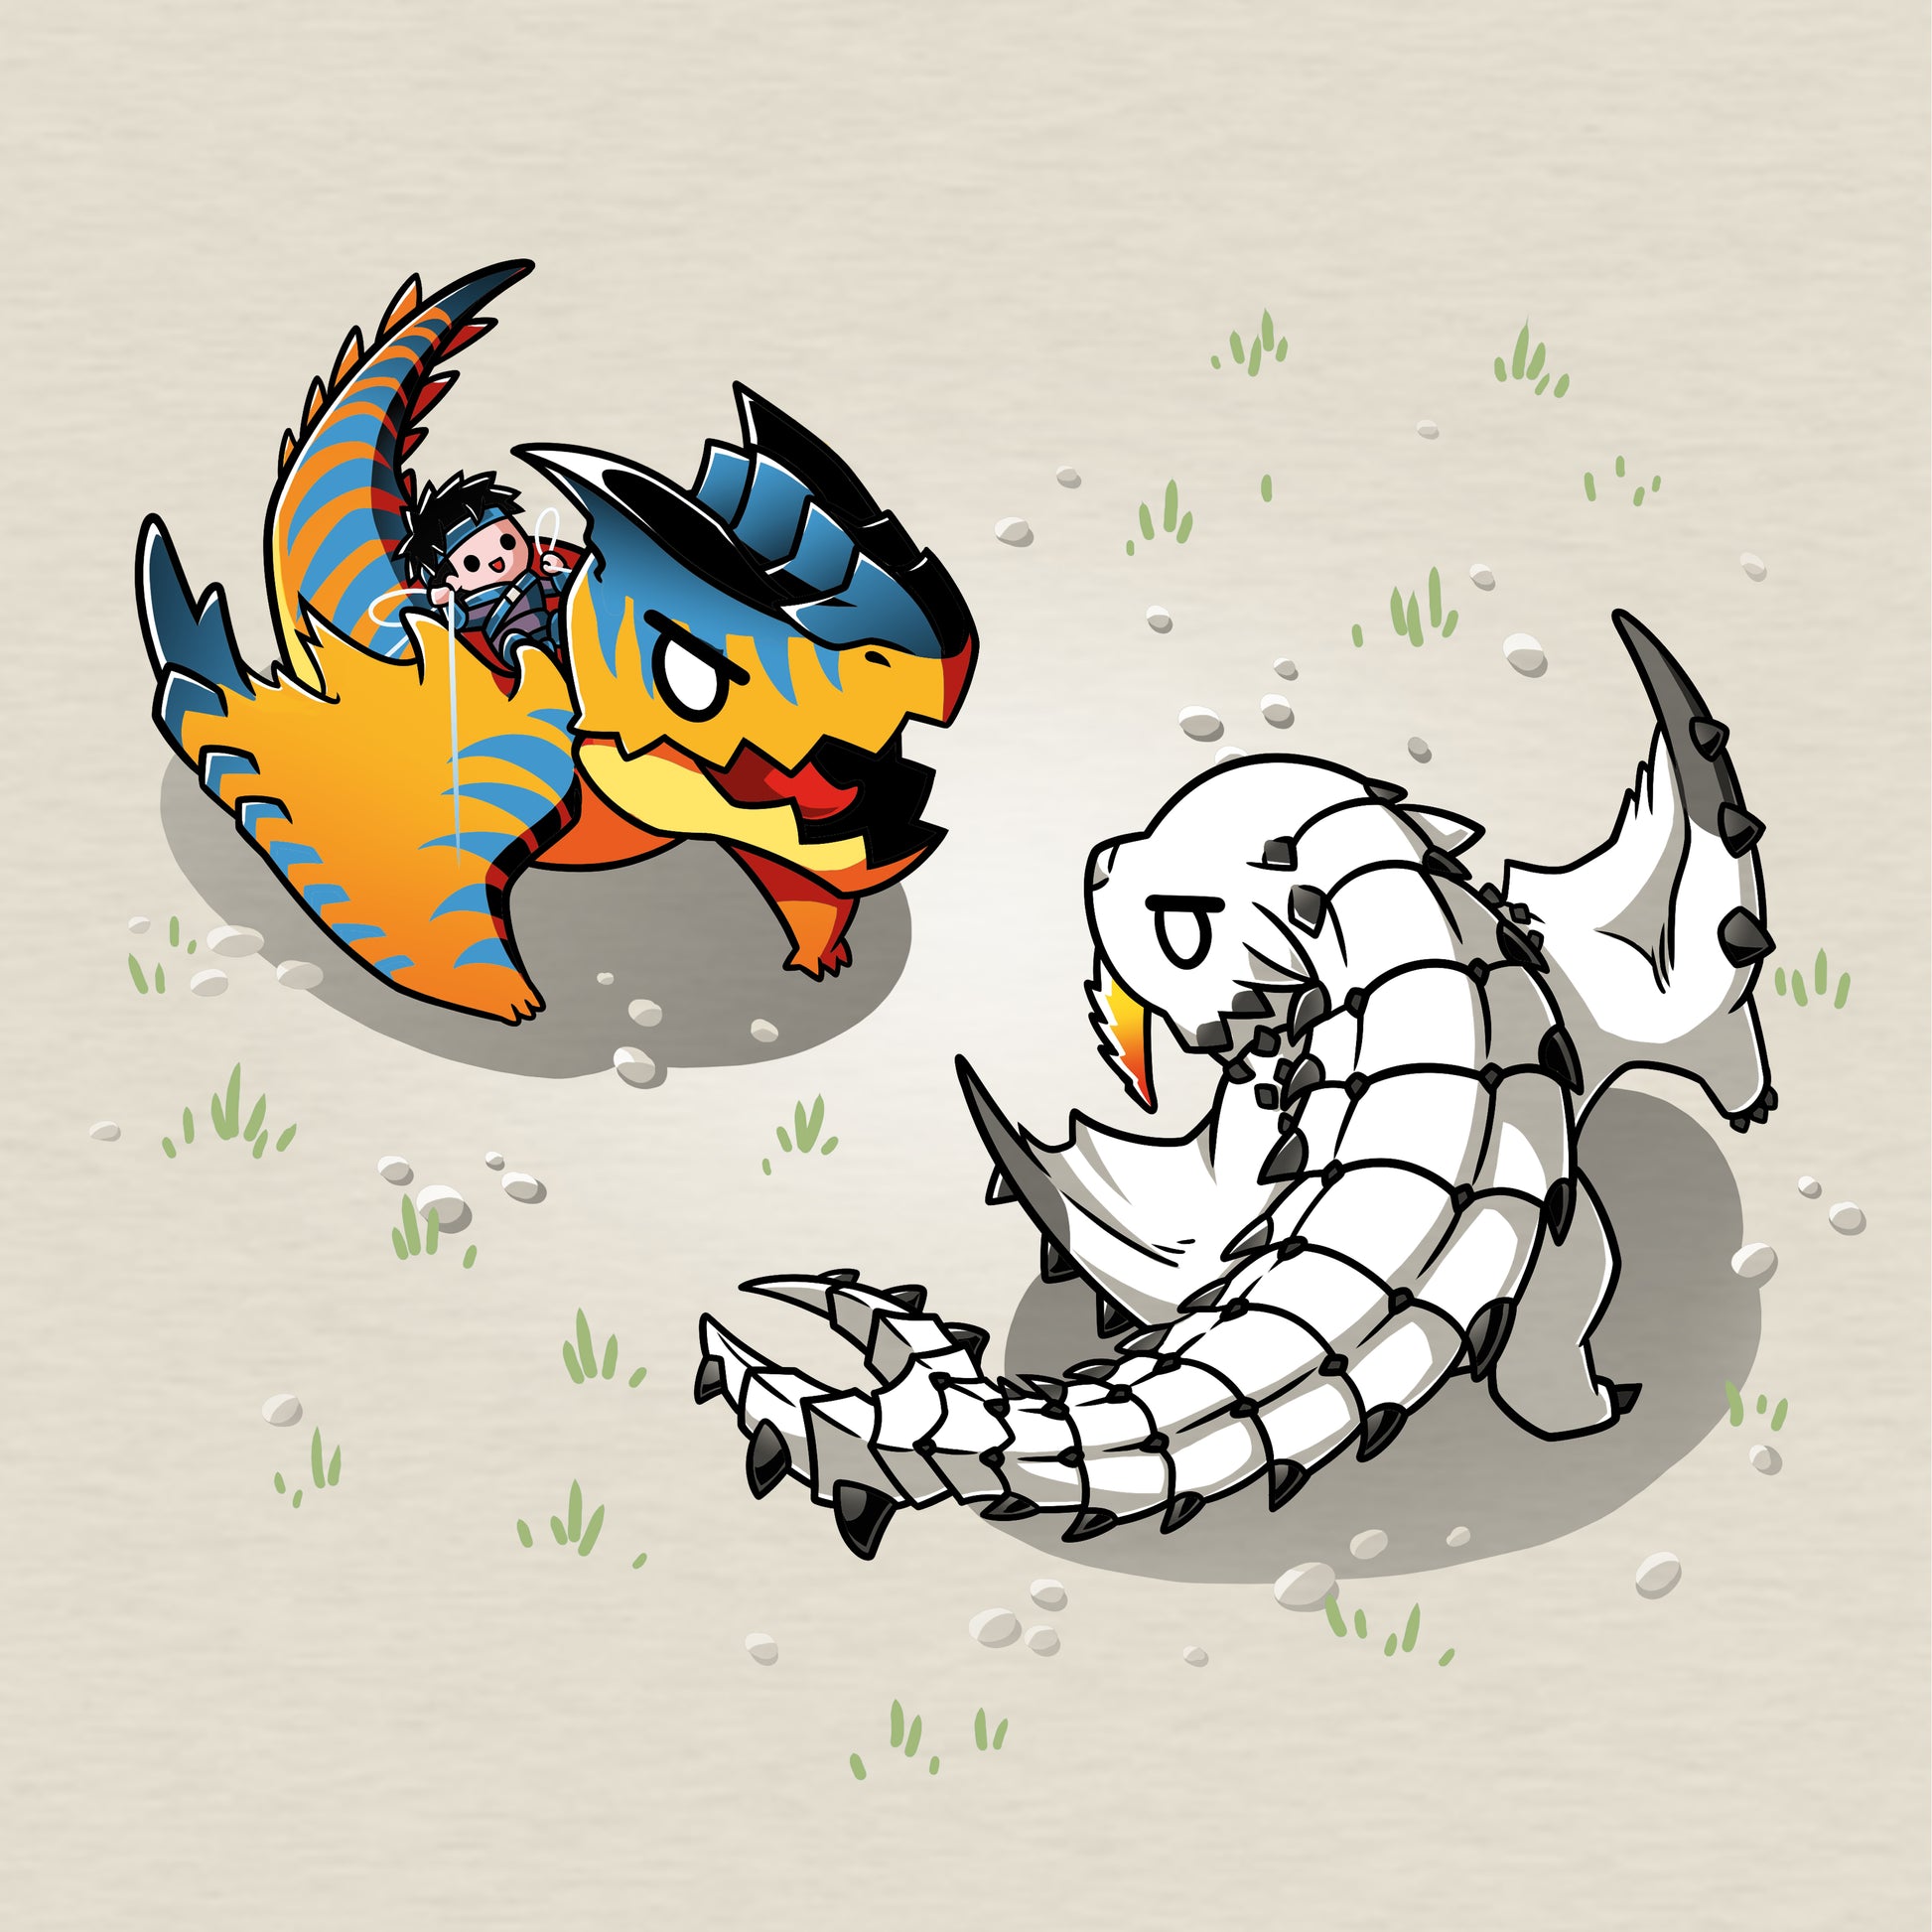 Two officially licensed cartoon characters are fighting each other on the ground, wearing Monster Hunter T-shirts of the Monster Battle brand.